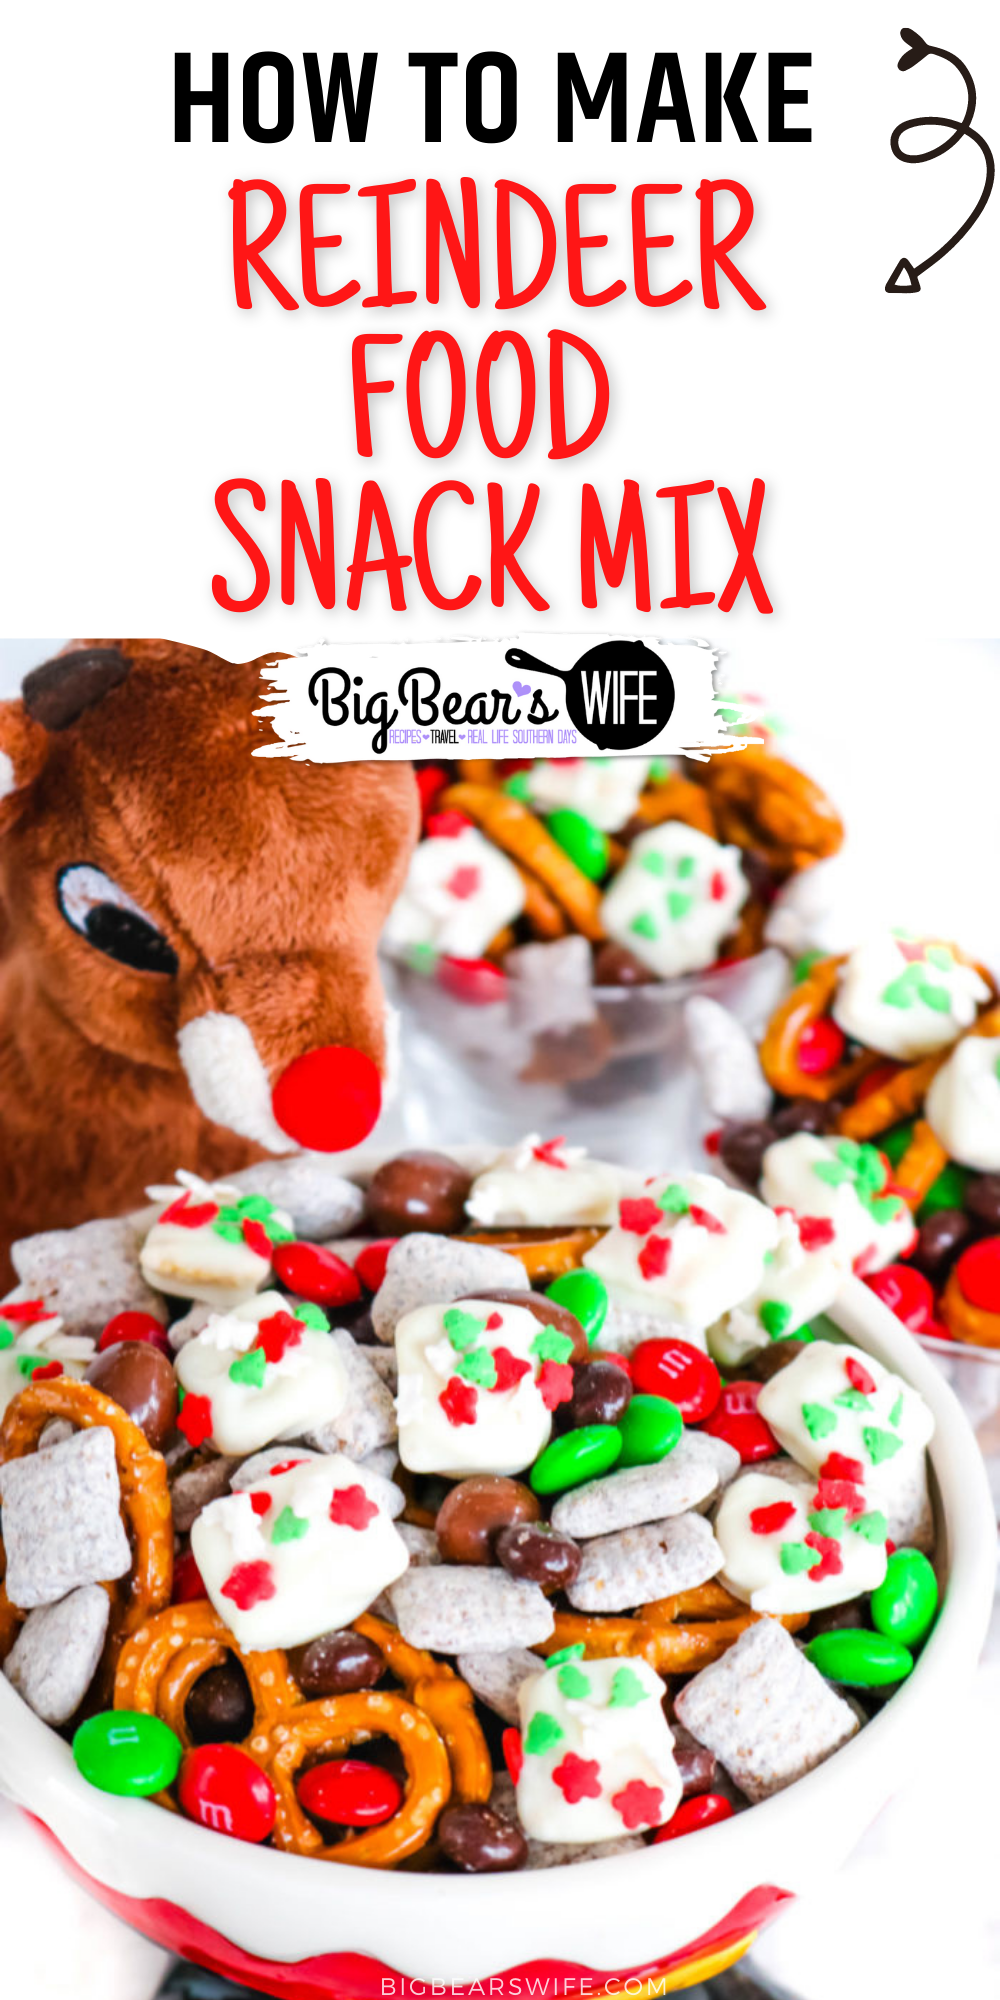 Reindeer Food Snack Mix is a festive trail mix with sweet and salty treats mixed together with homemade Reindeer Food bites!  via @bigbearswife